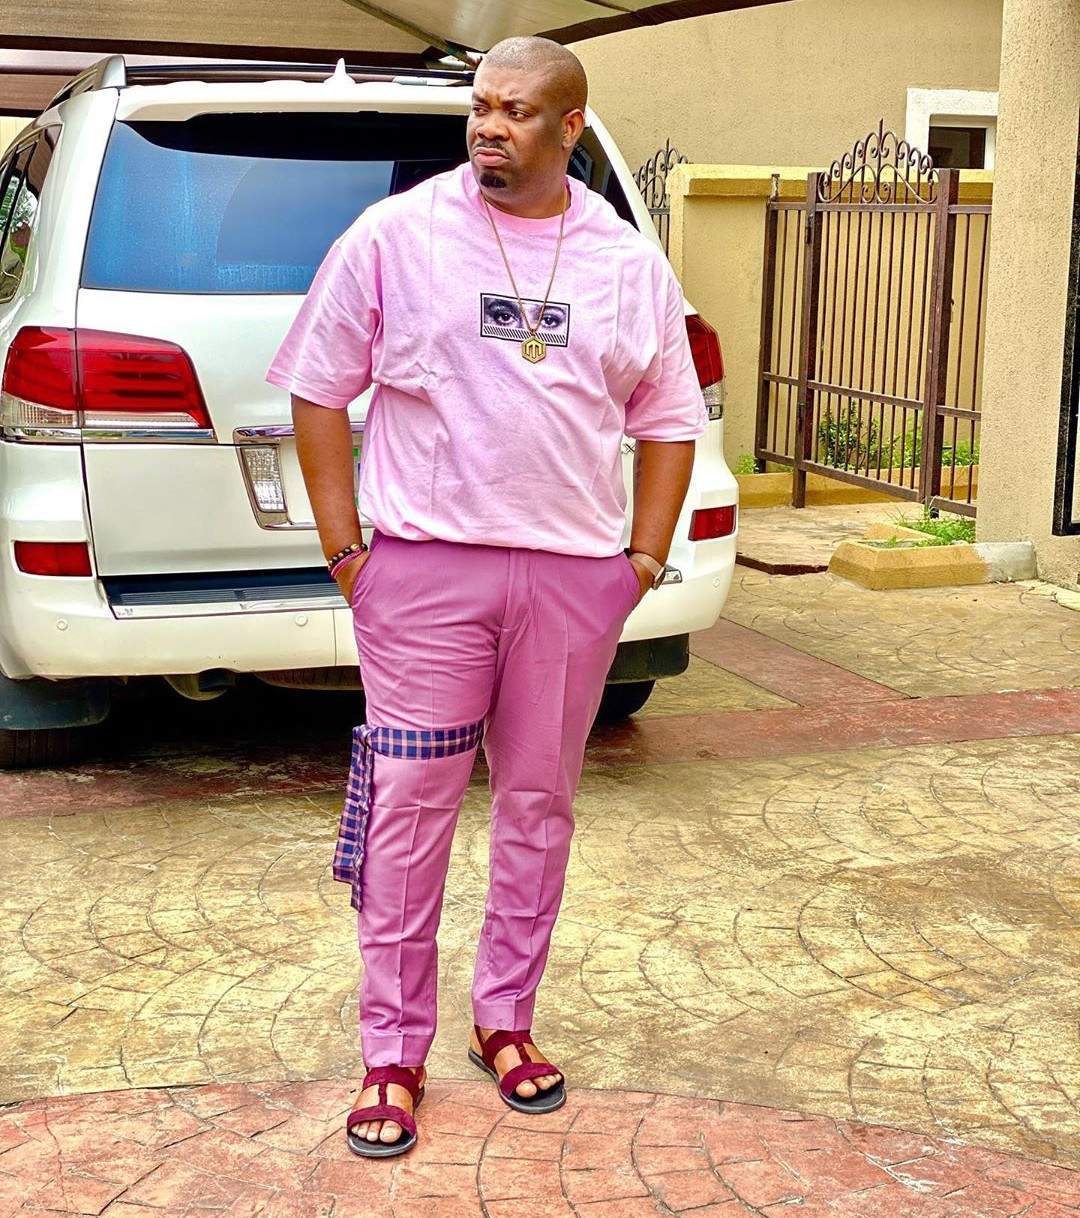 'Don't belittle women' - Don Jazzy replies actress Uyanda Mbuli over comment on his 'unironed' cloth